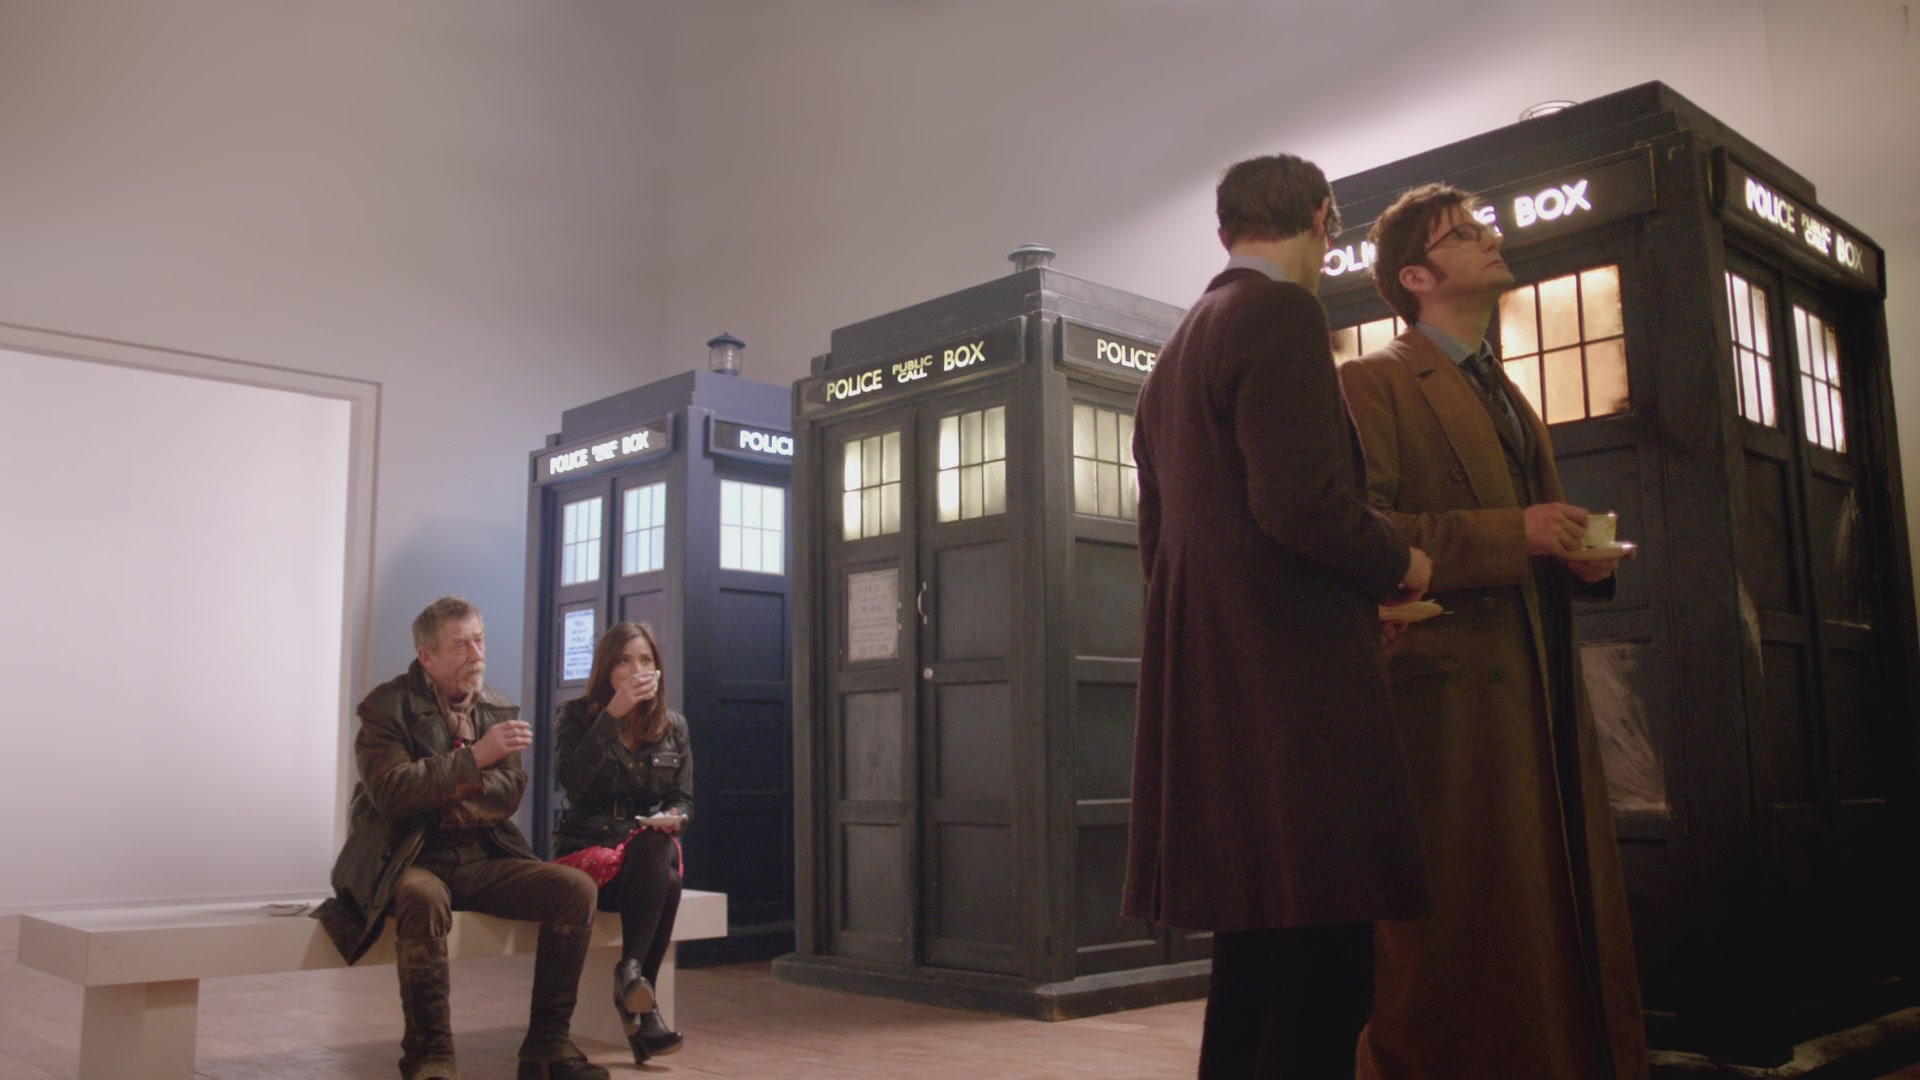 DayOfTheDoctor-Caps-1233.jpg